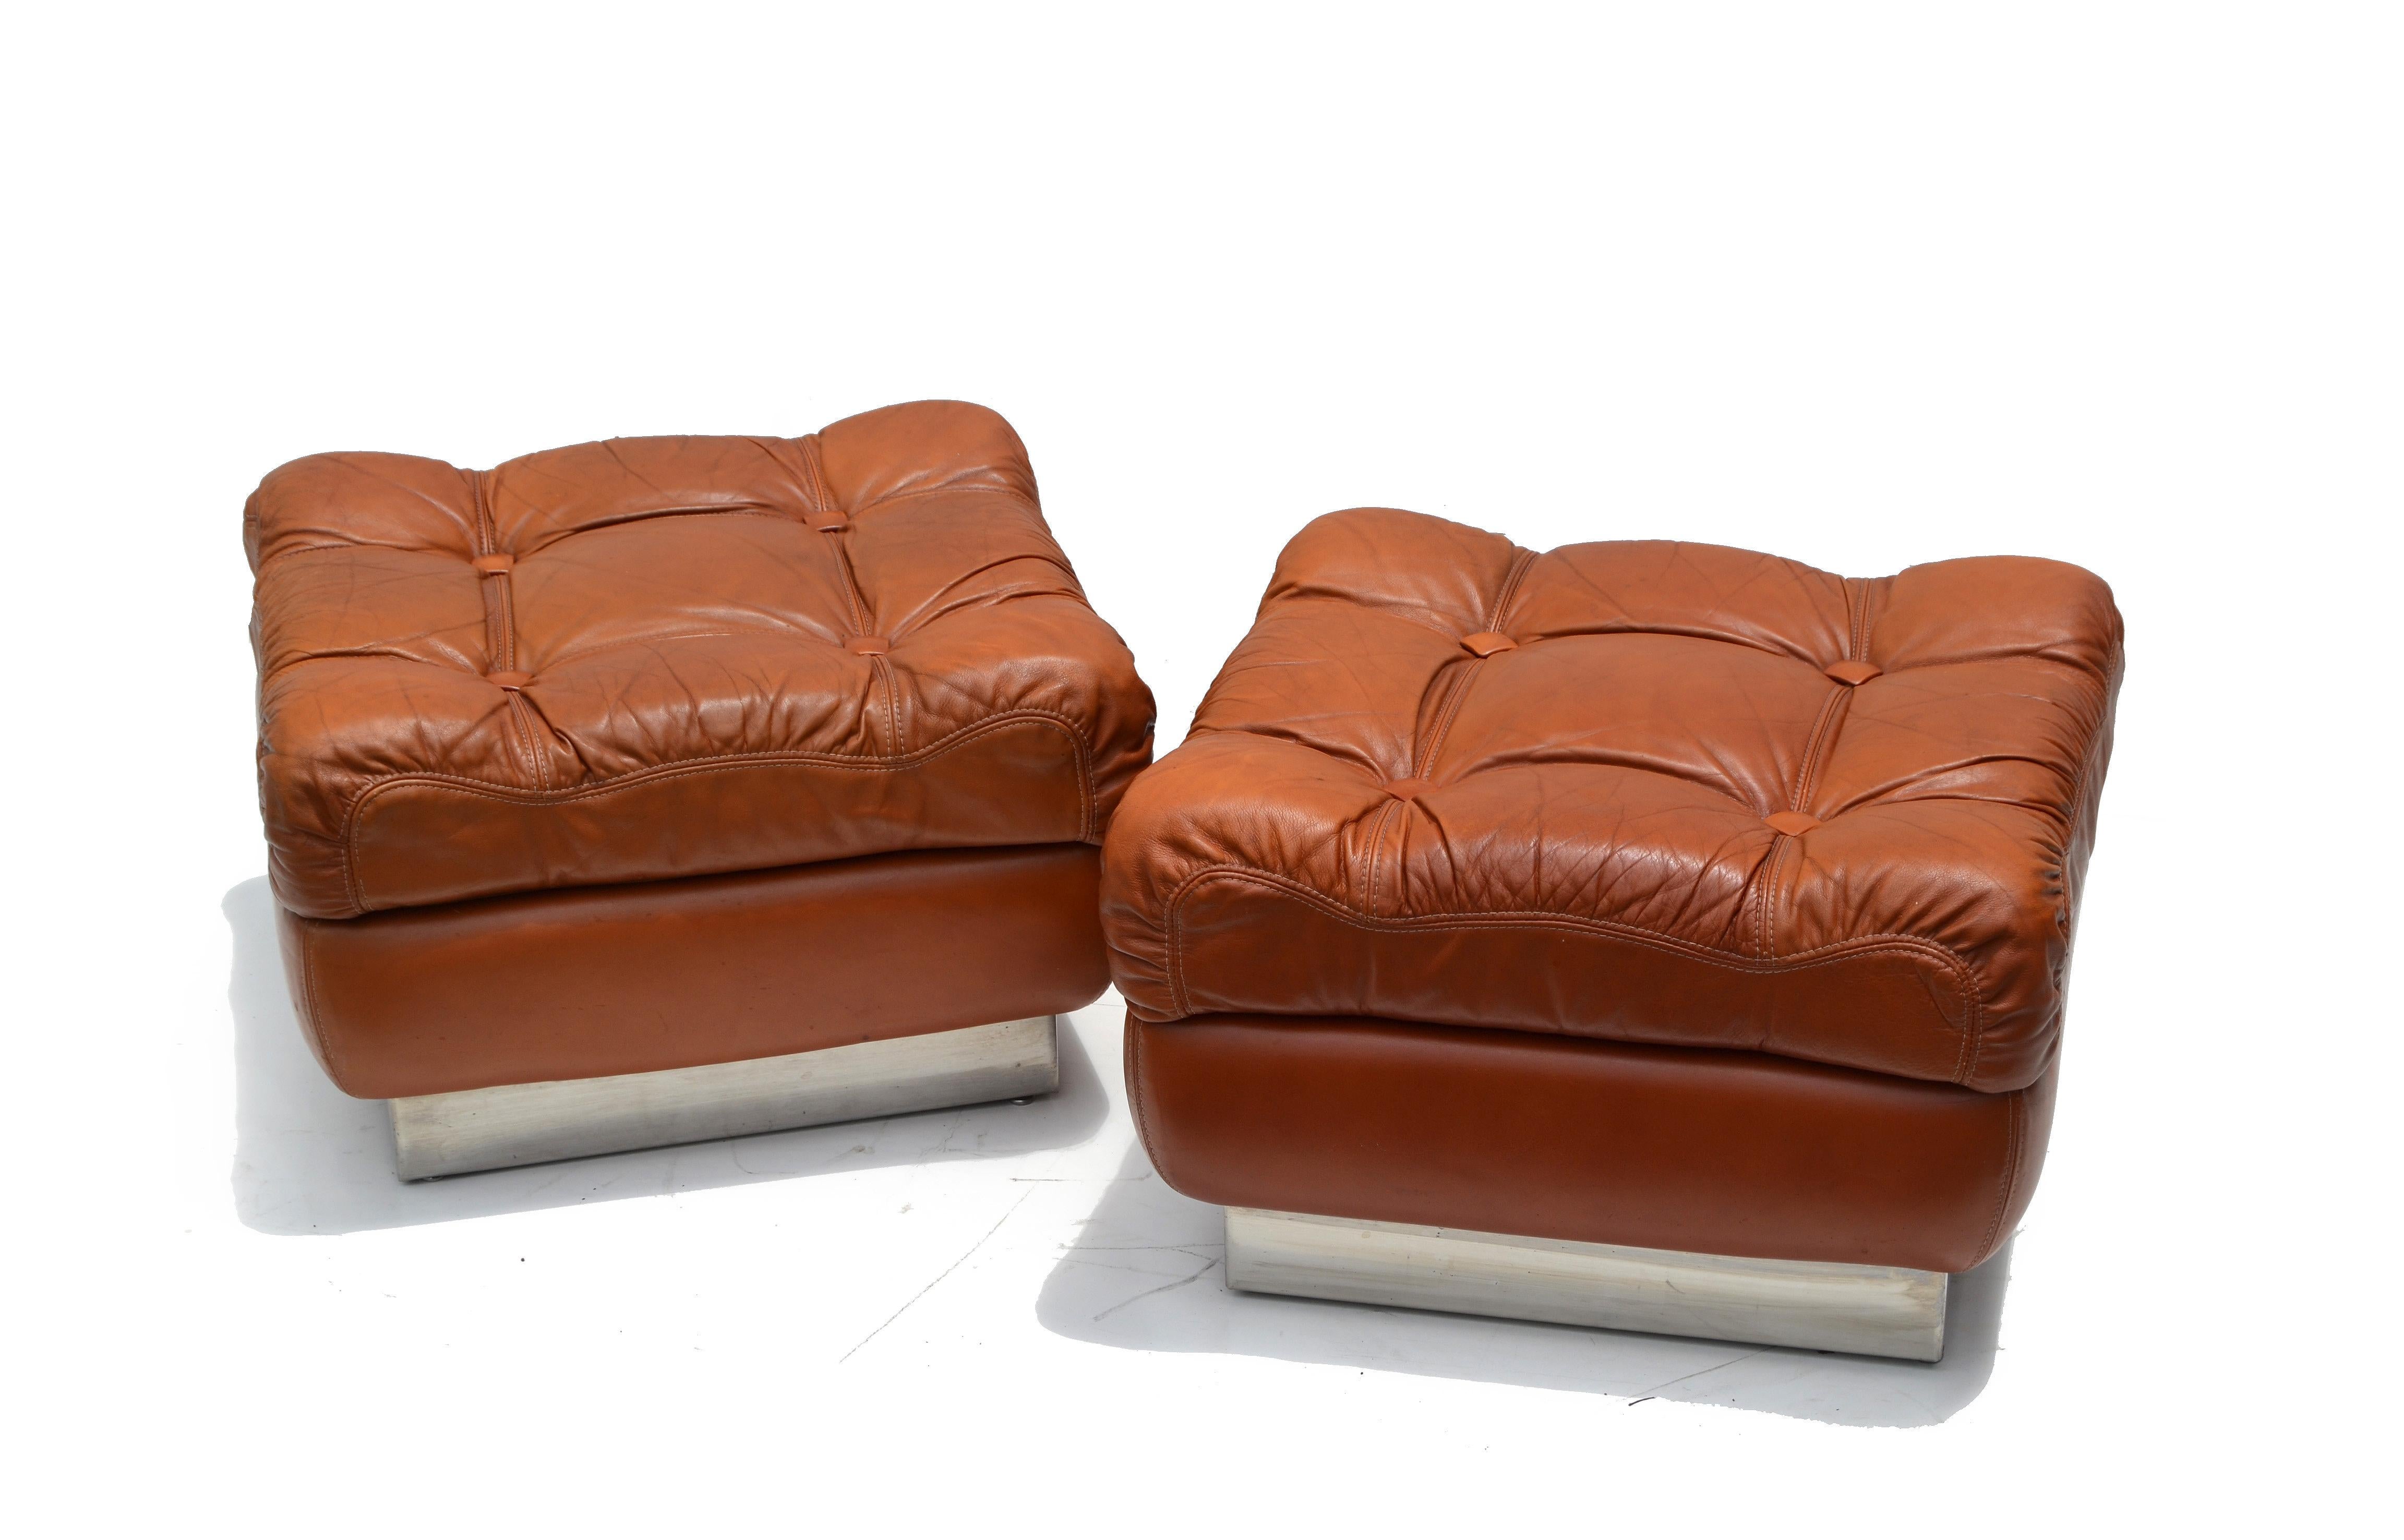 Jacques Charpentier Mid-Century Modern Tufted Leather Ottoman Stool Pair In Good Condition For Sale In Miami, FL